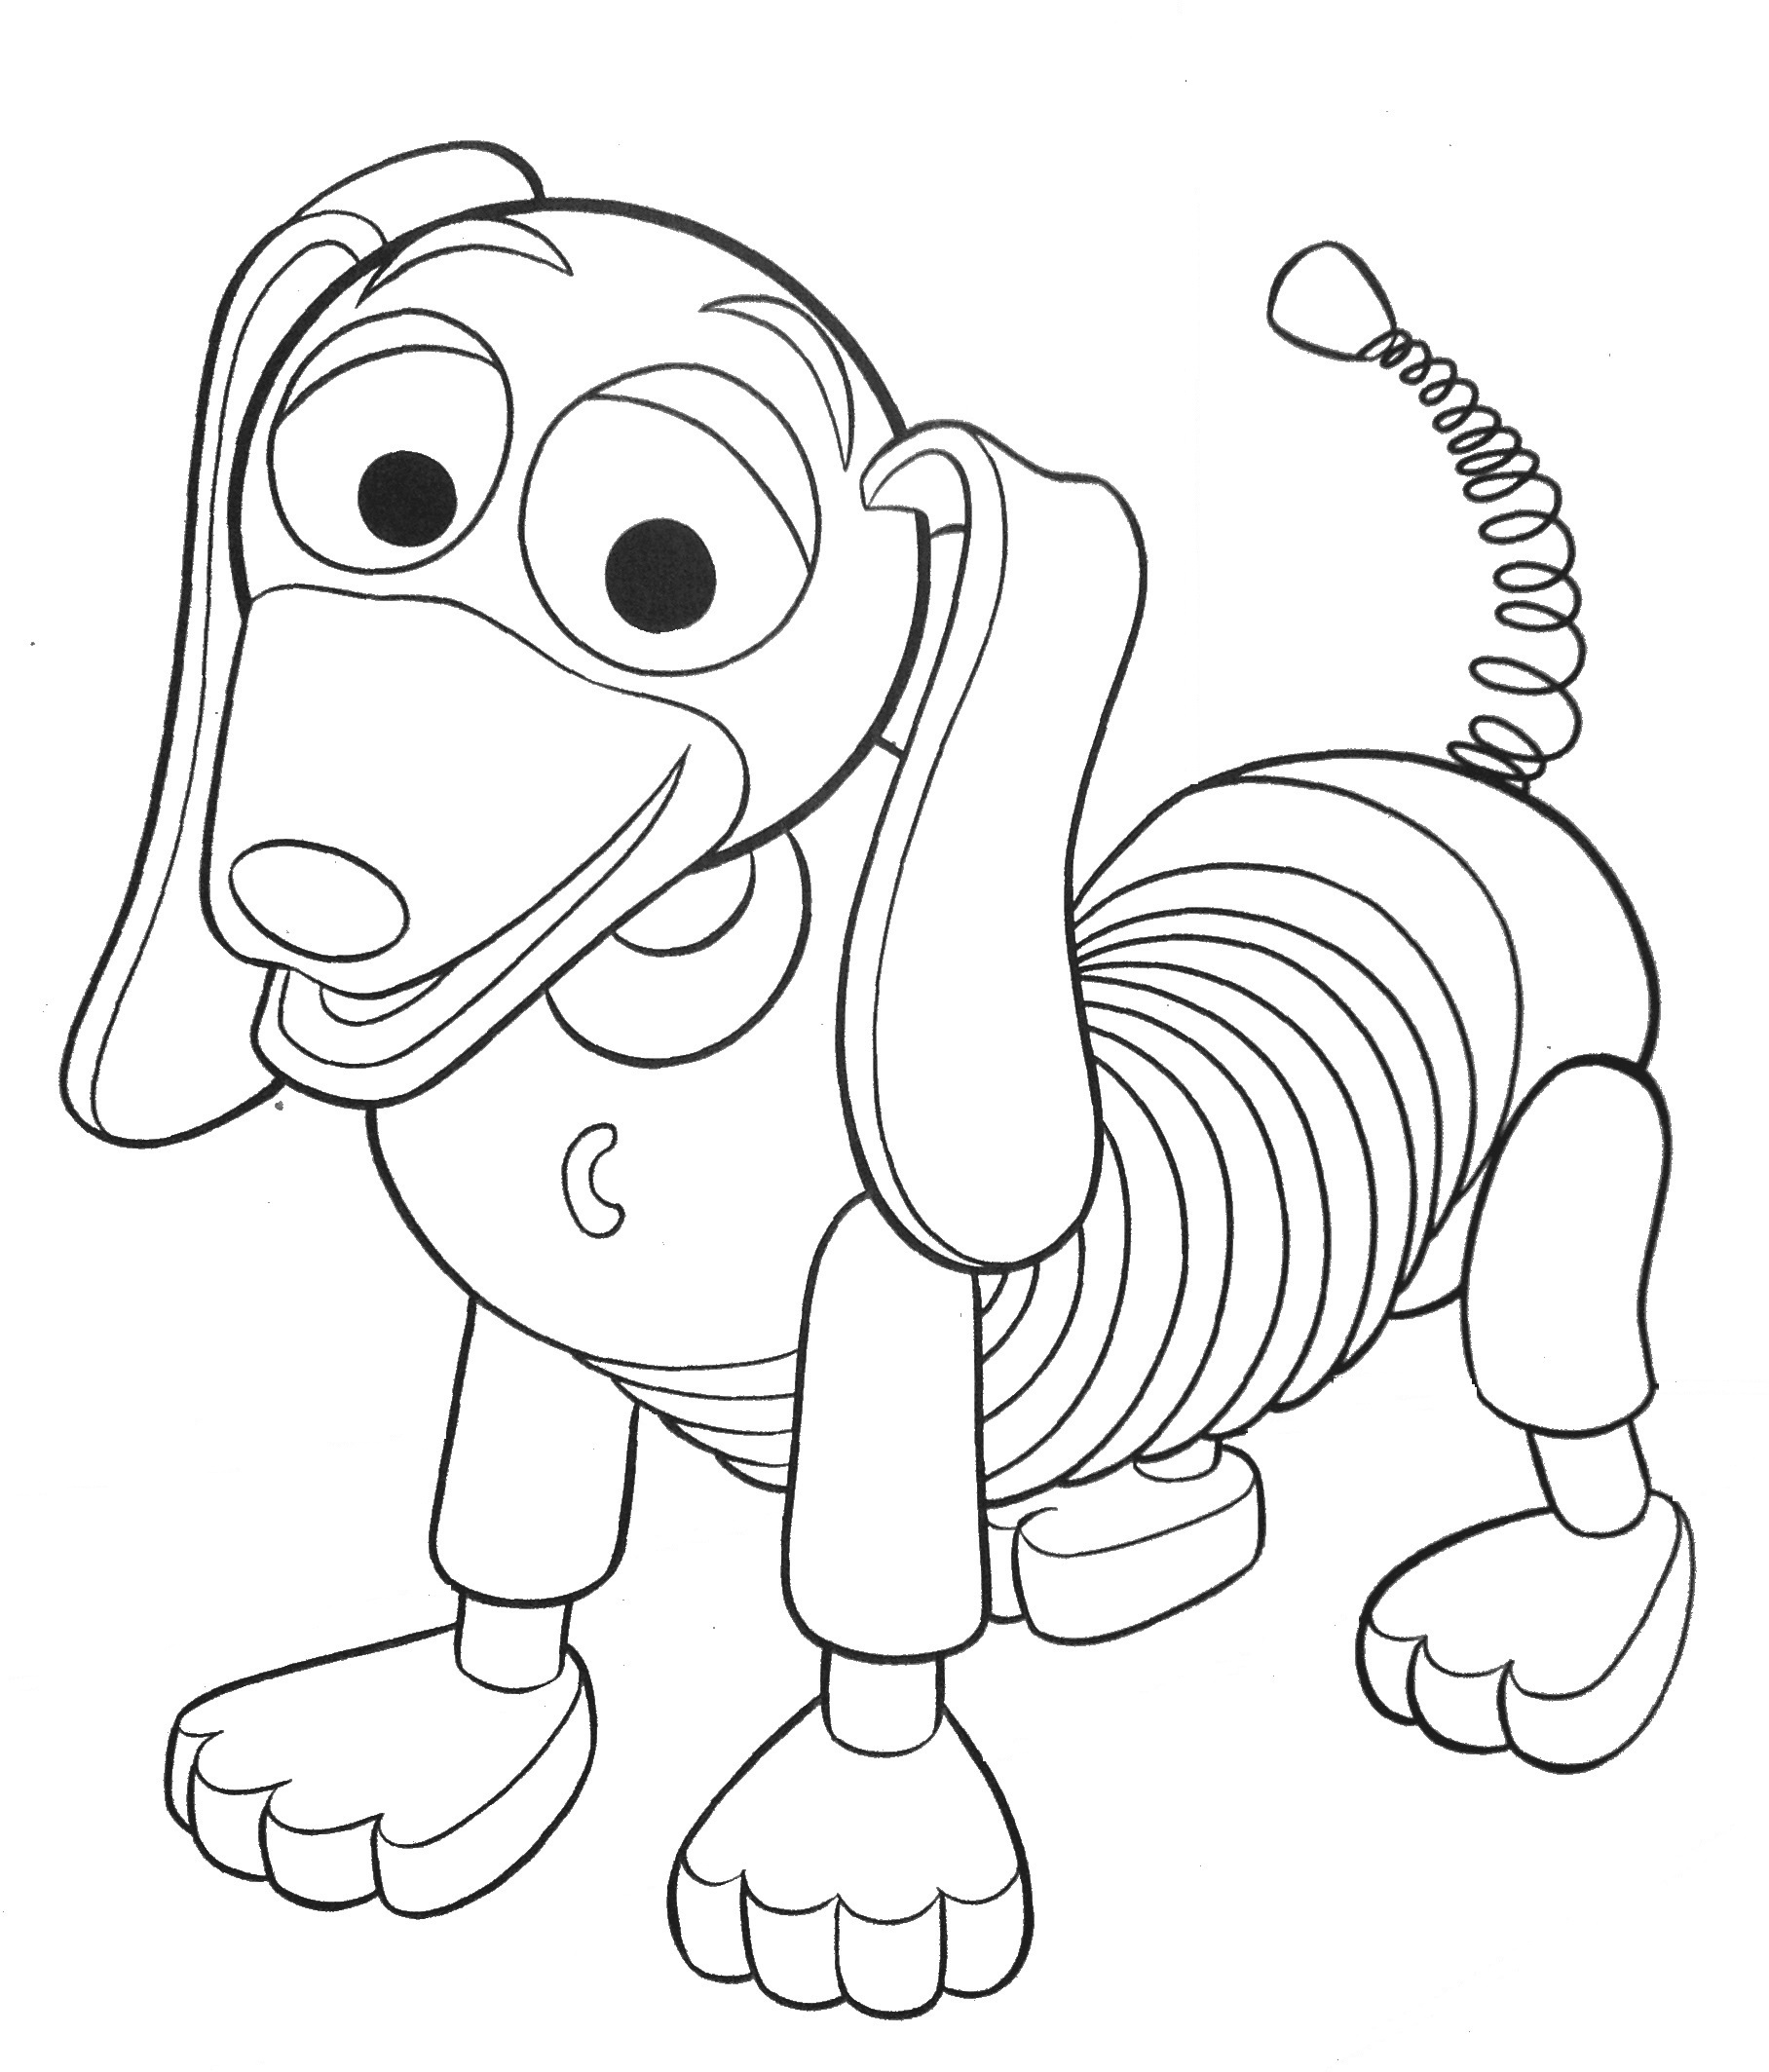 Disney Toy Story Woody And Buzz Coloring Page Crayola Com Woody Toy 